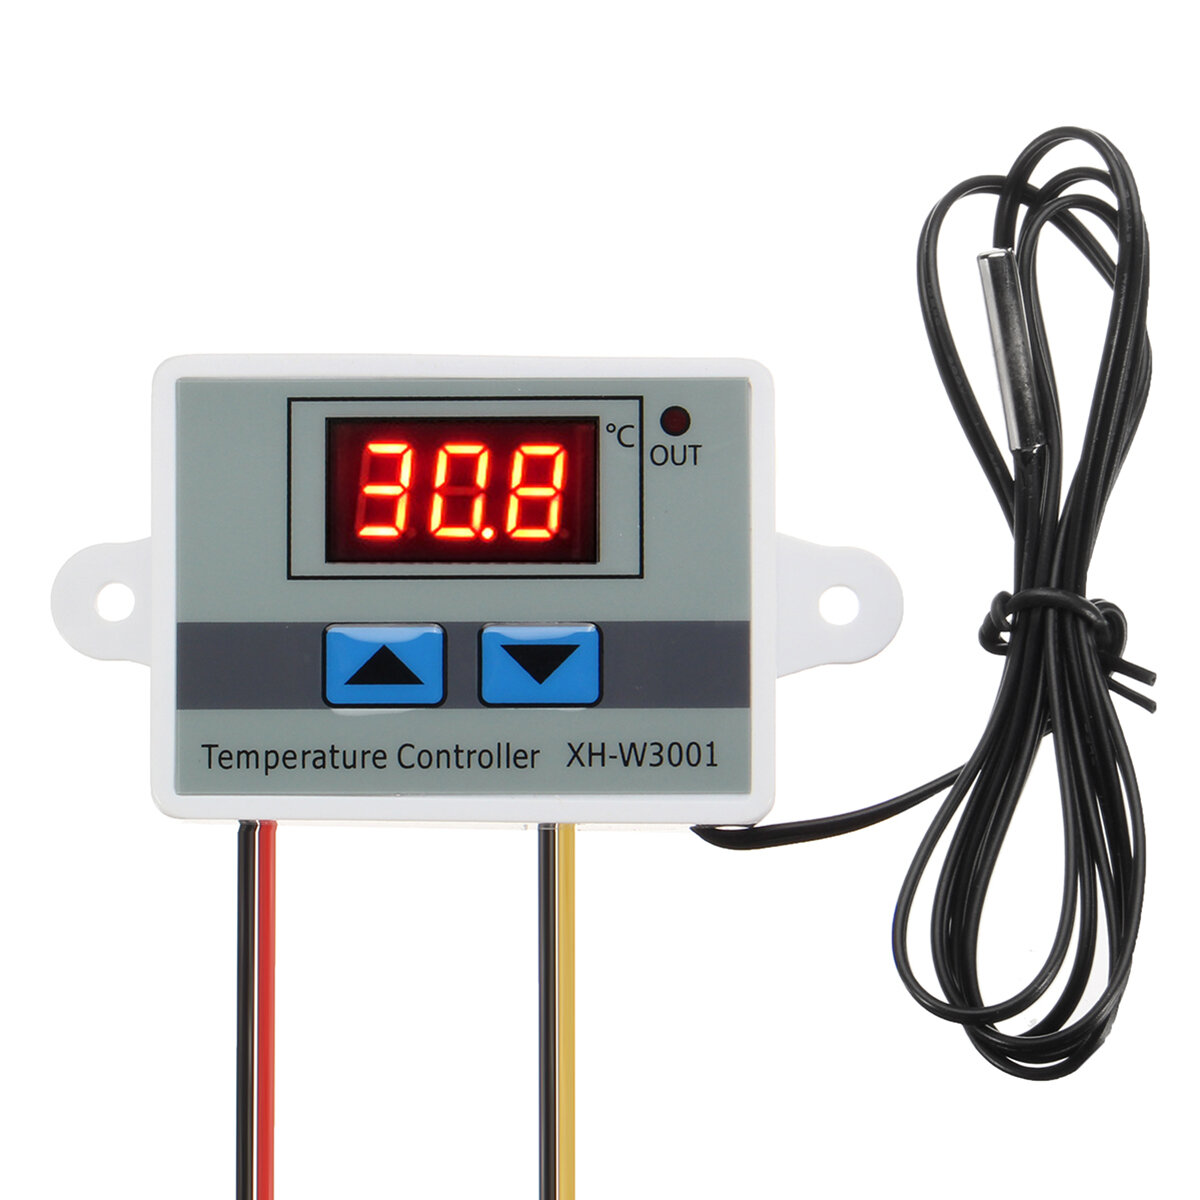 

24V 240W Digital Control Temperature Microcomputer Thermostat Switch Controller